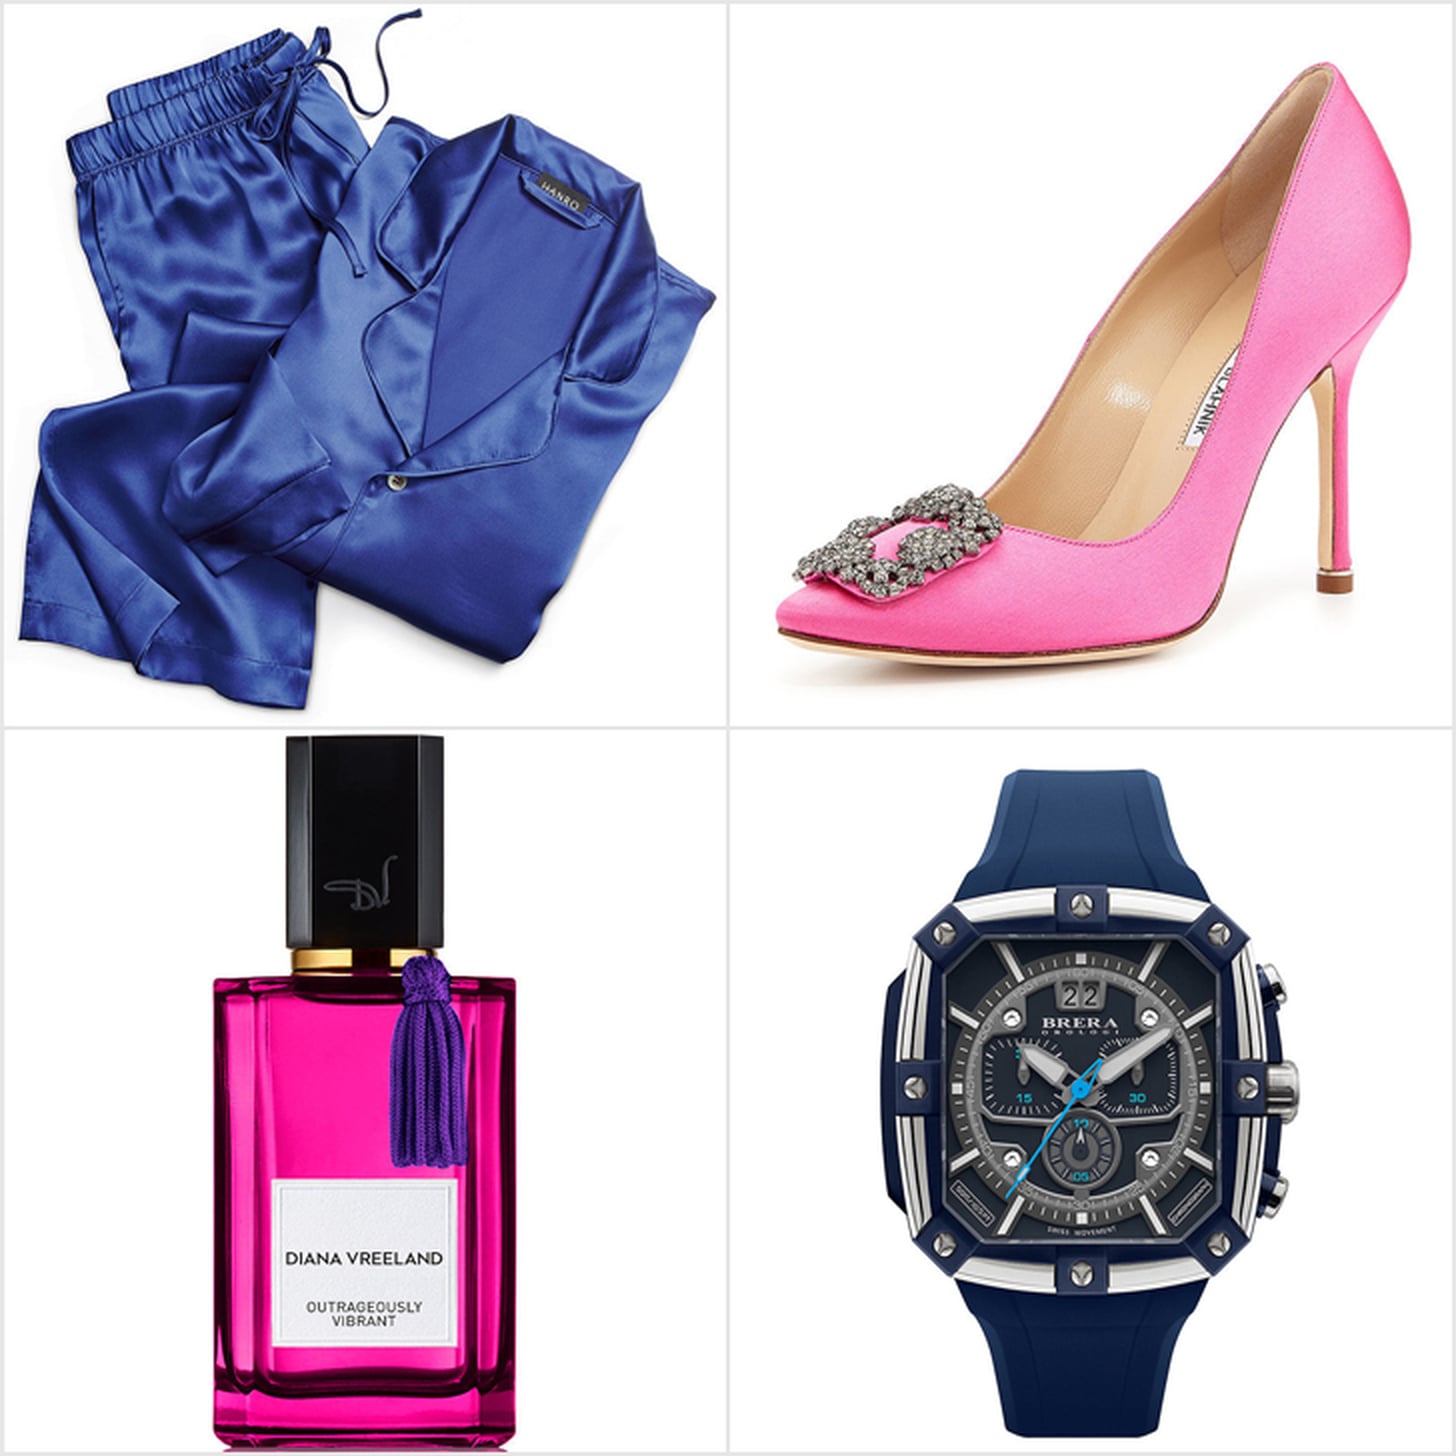 Expensive Luxury Gifts For Your Spouse | POPSUGAR Love & Sex